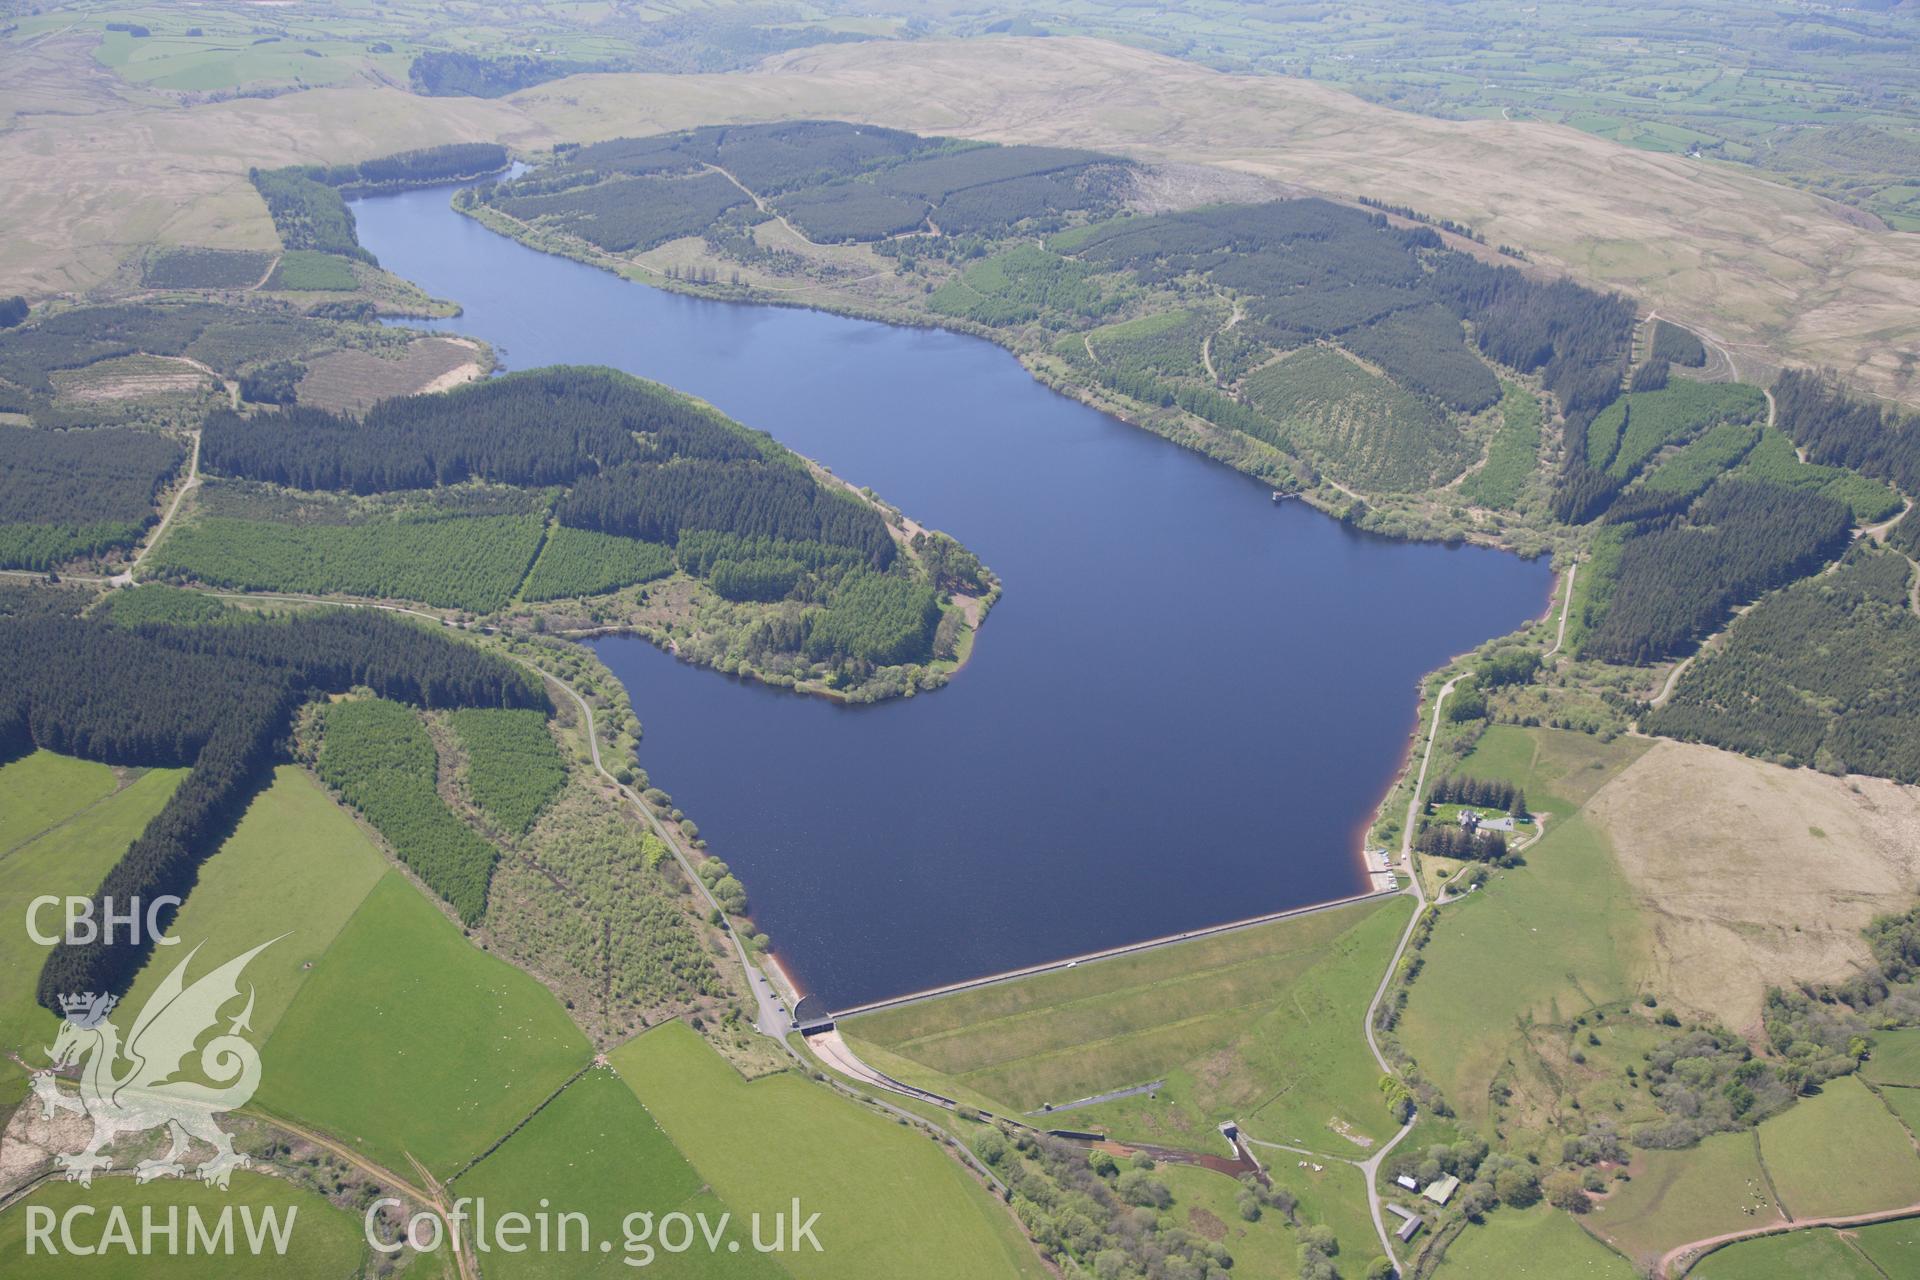 RCAHMW colour oblique photograph of Usk Reservoir. Taken by Toby Driver on 22/05/2012.